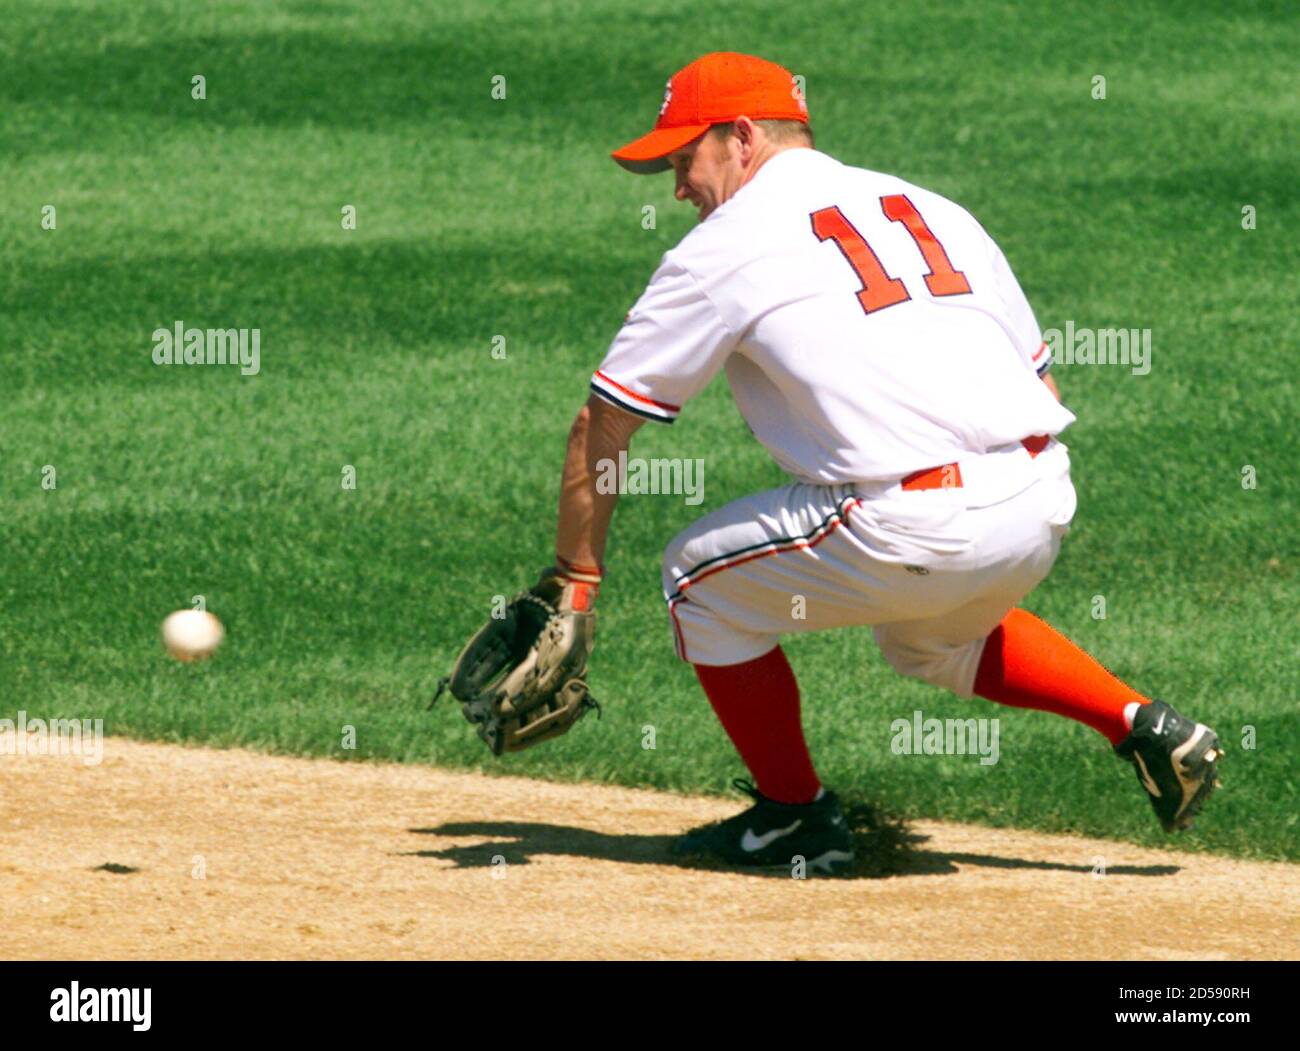 Second baseman Stubby Clapp of Canada makes a back-handed play for the  final out of the second inning against Brazil, during their opening-round baseball  game at the Pan American Games in Winnipeg,